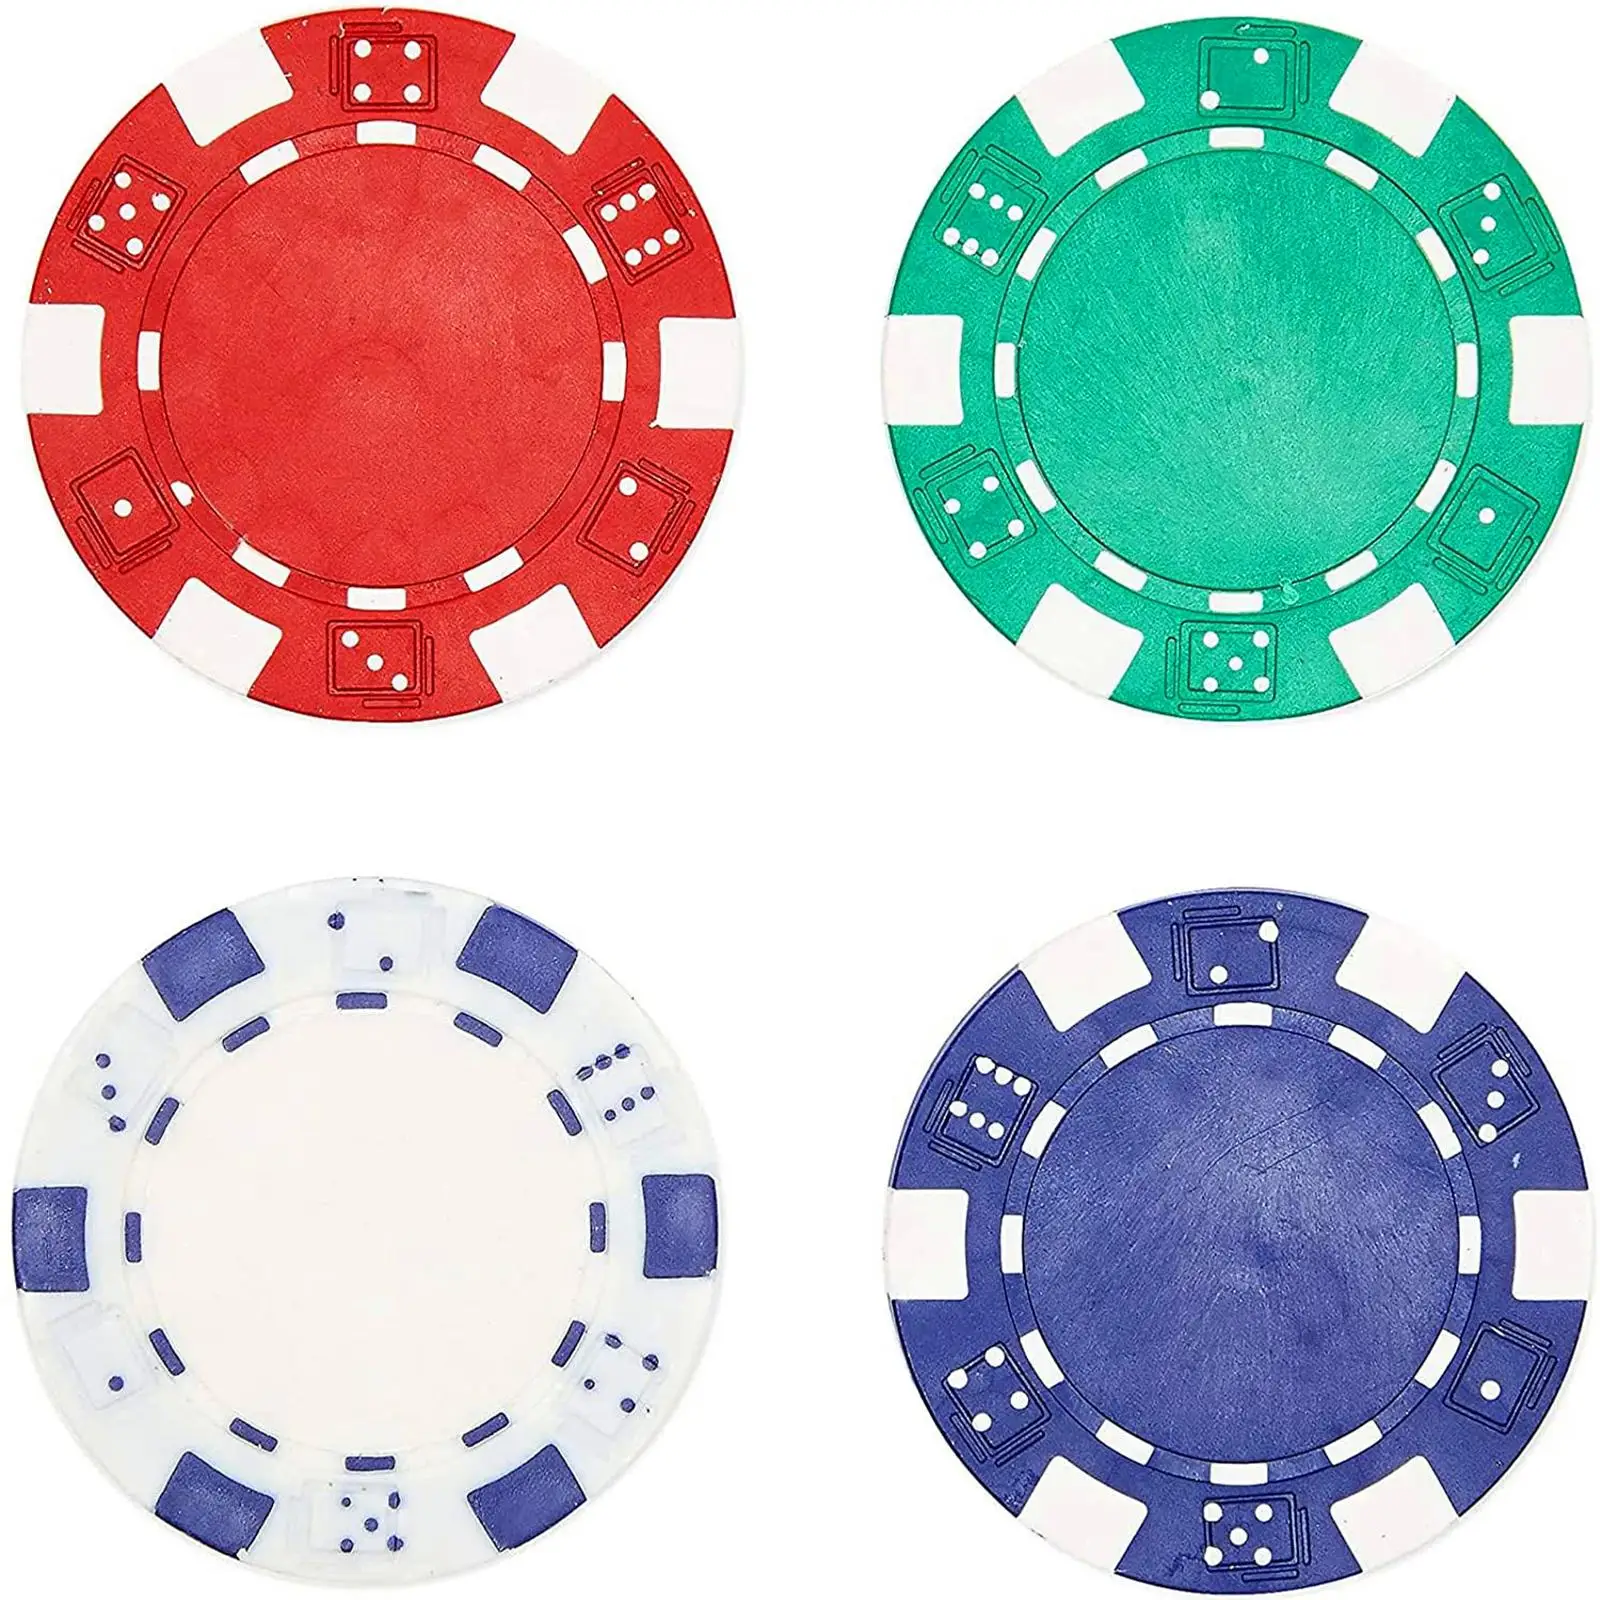 100x ABS Poker Chips Bingo Chips Markers for Board Games Counting Carnival